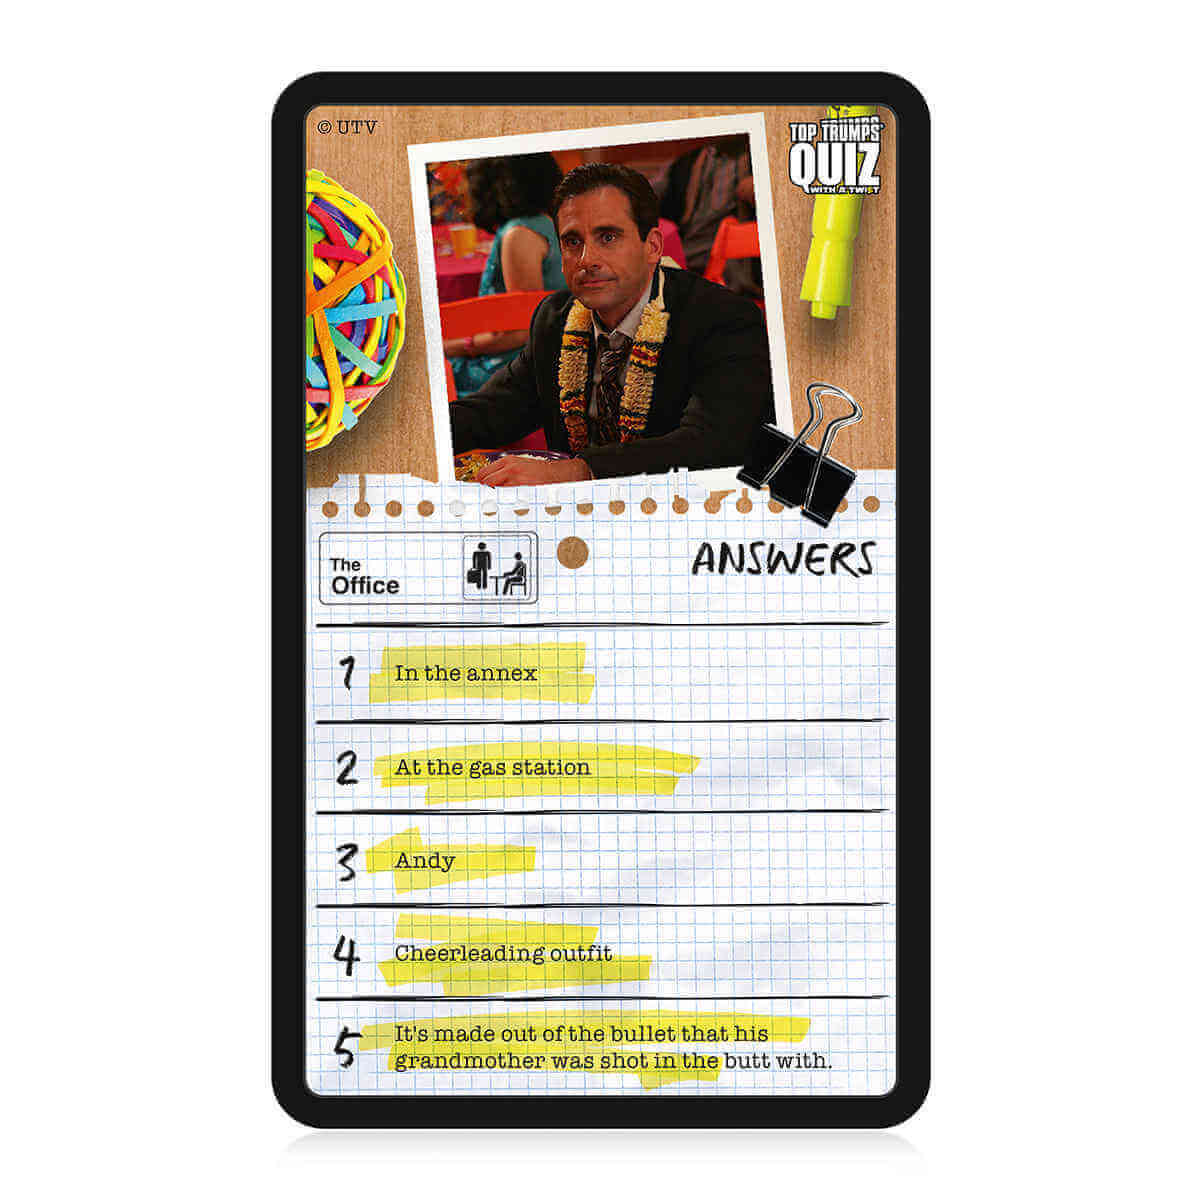 The Office Top Trumps Quiz Card Game